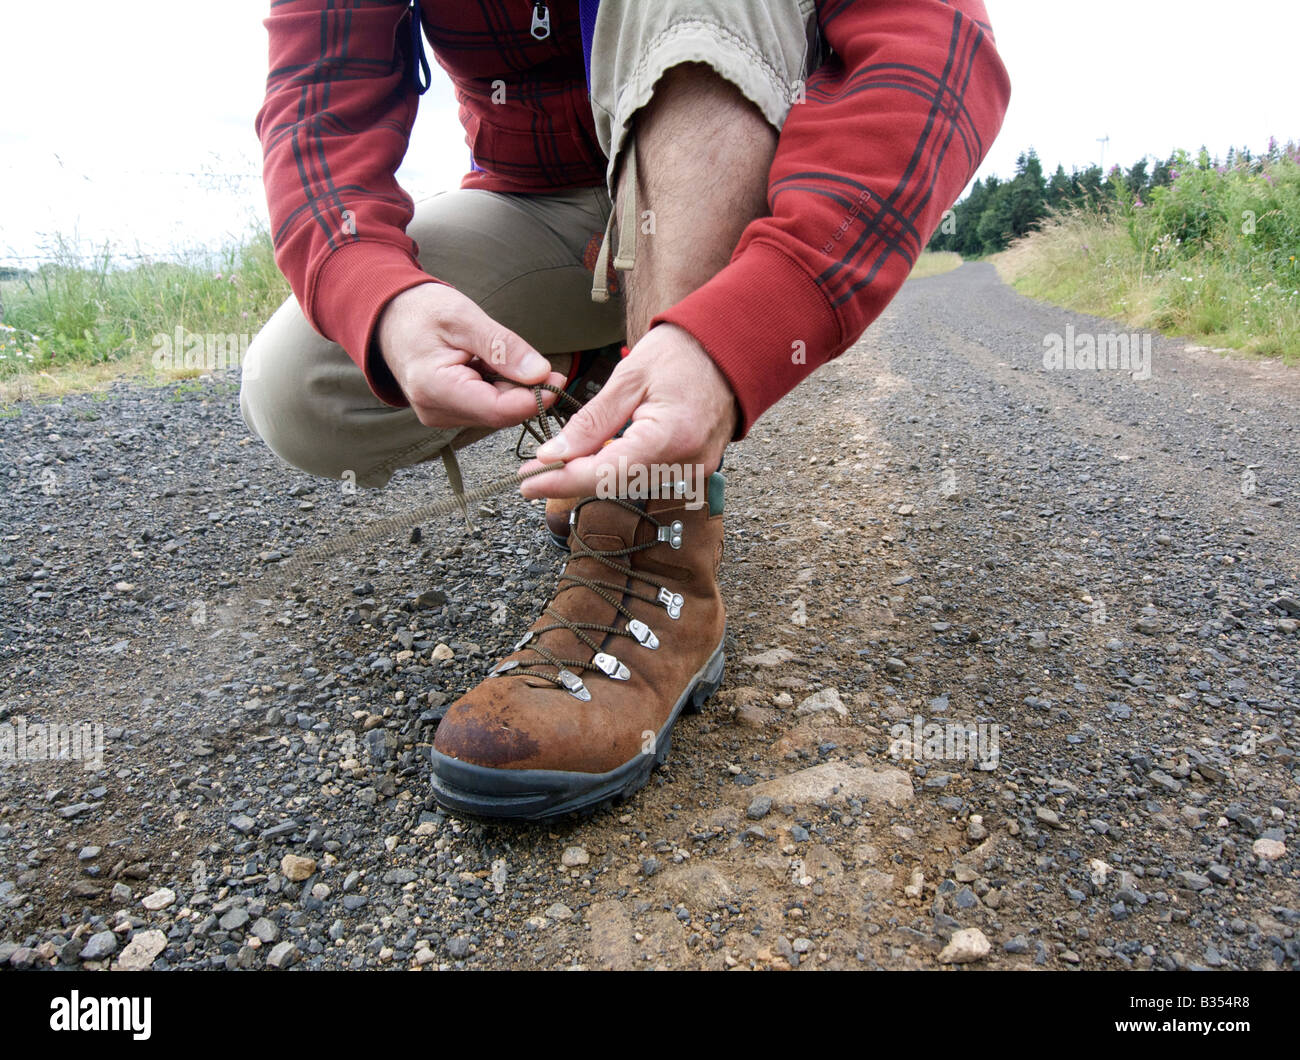 Man tying his walking shoes / boots laces Stock Photo